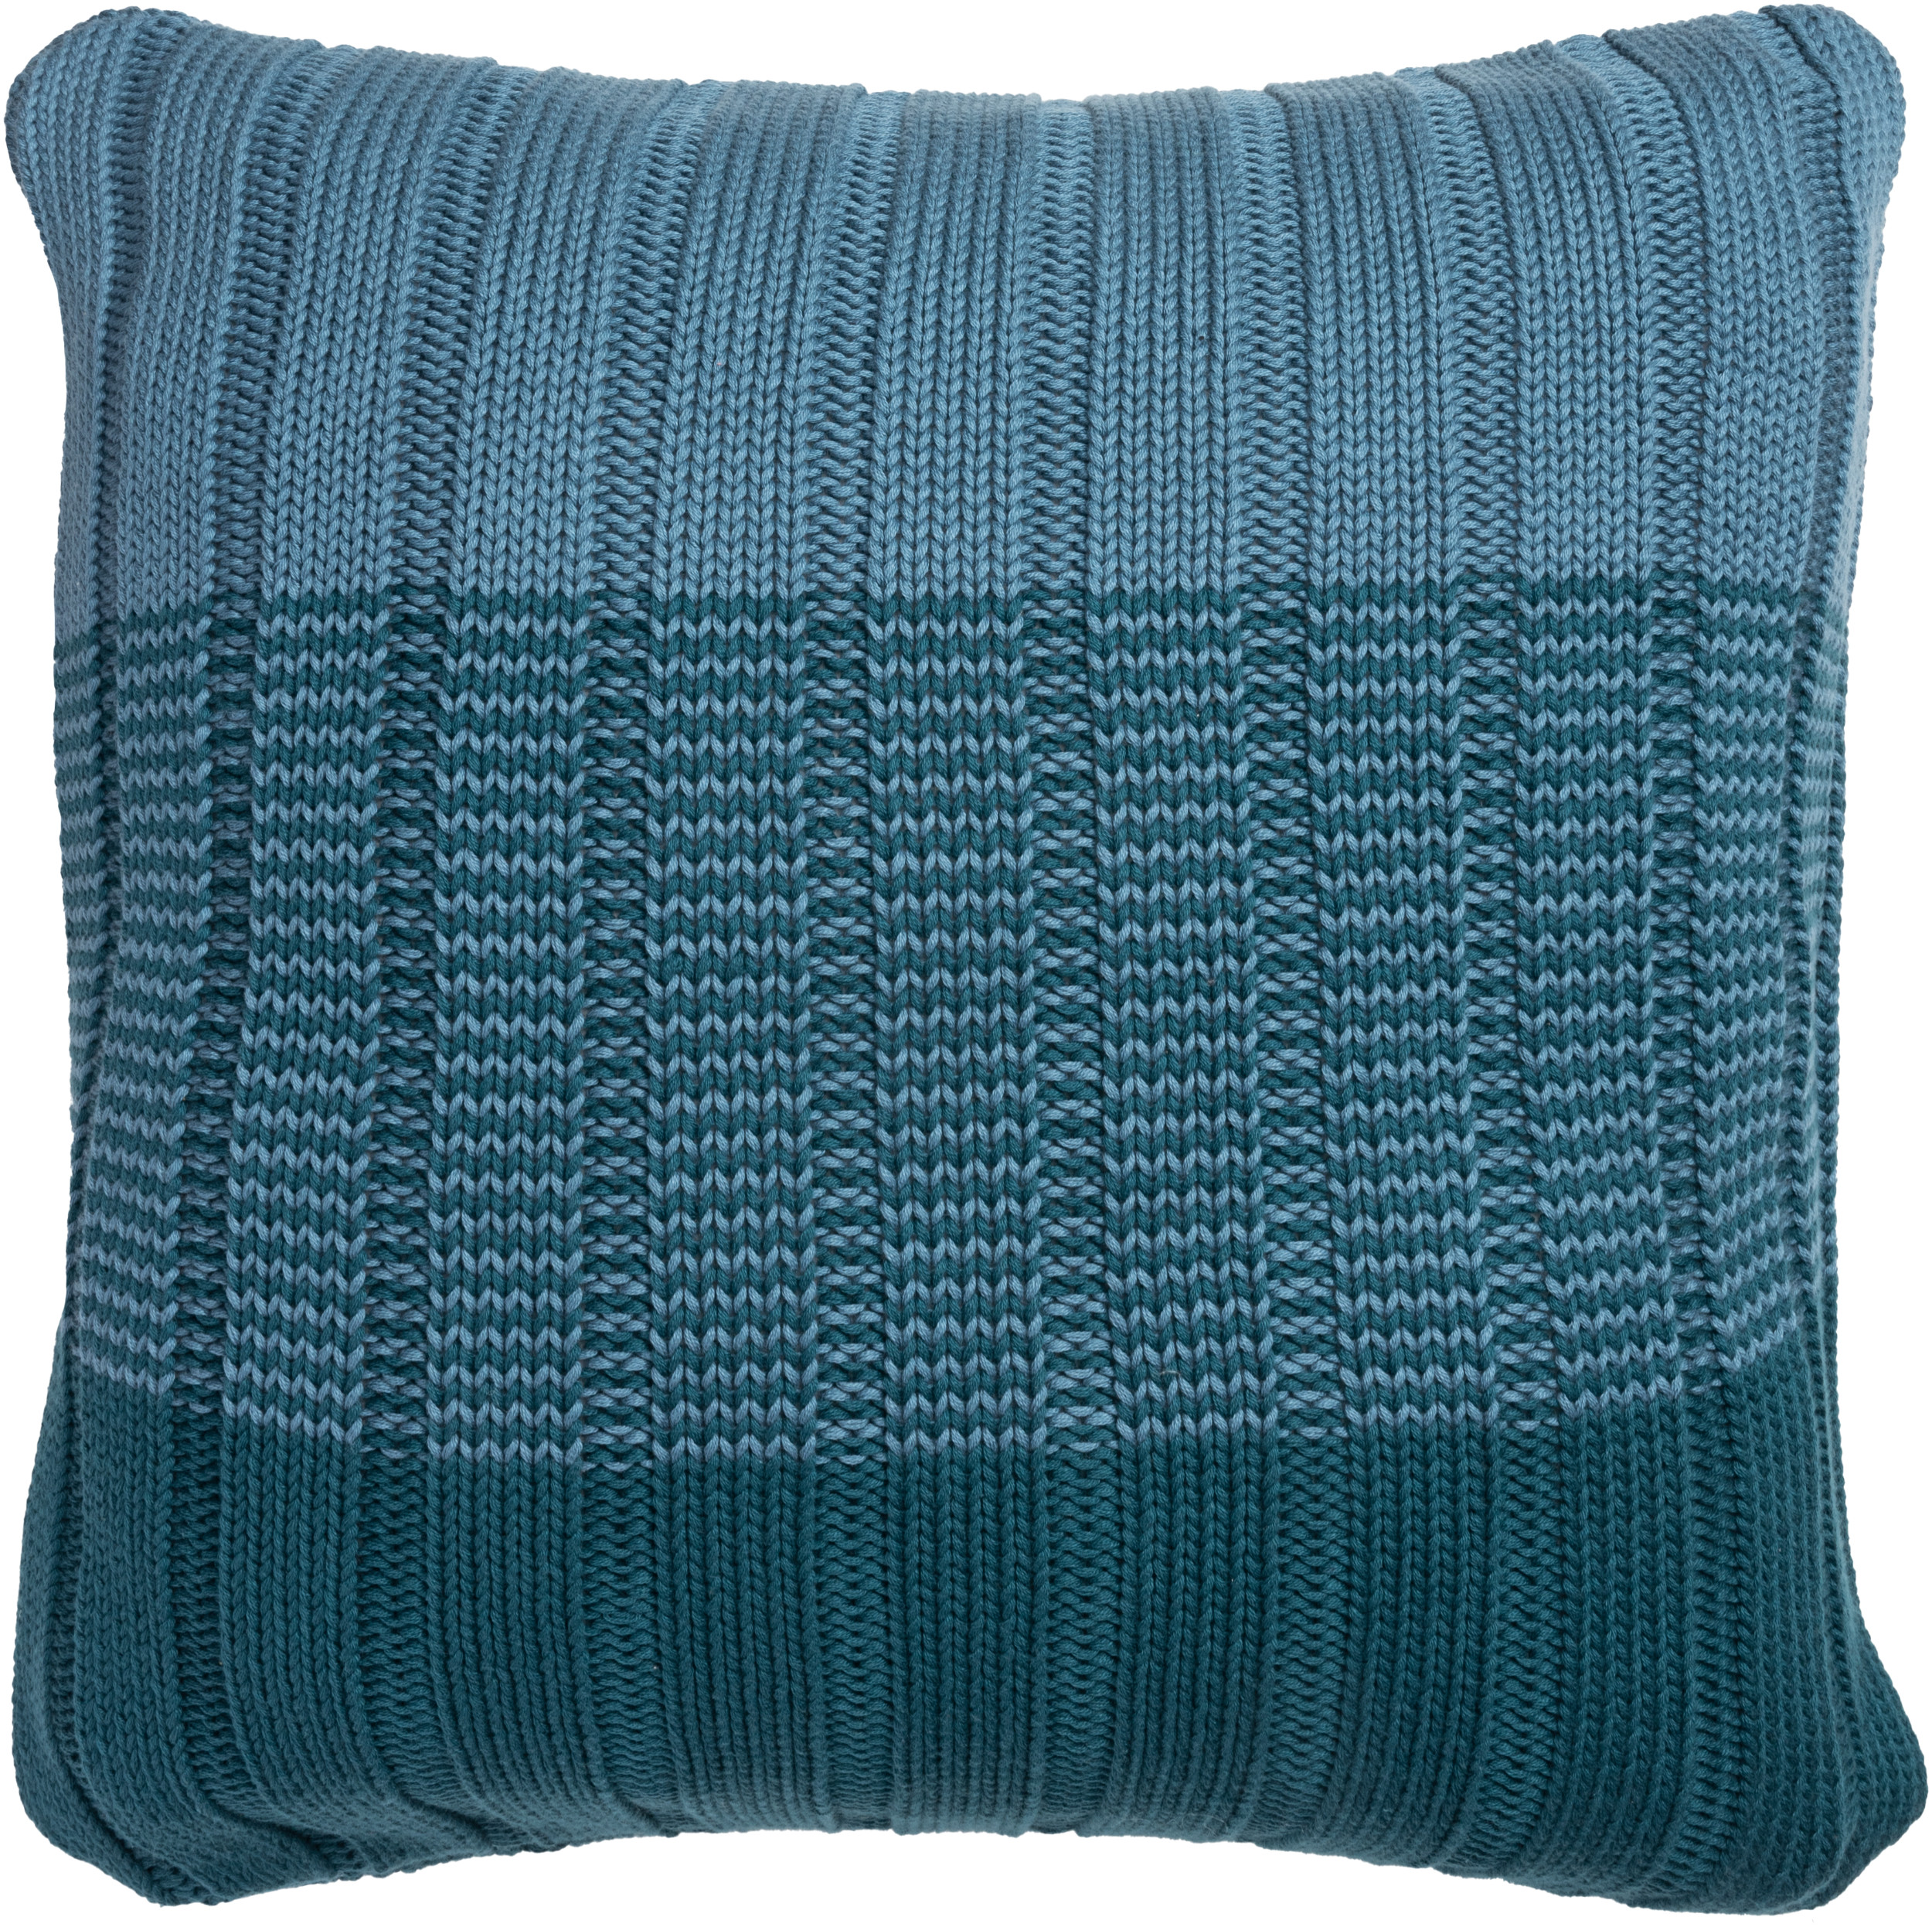 Create More than Sea(sonal) moments: The cushion in block stripes from Tranquillo